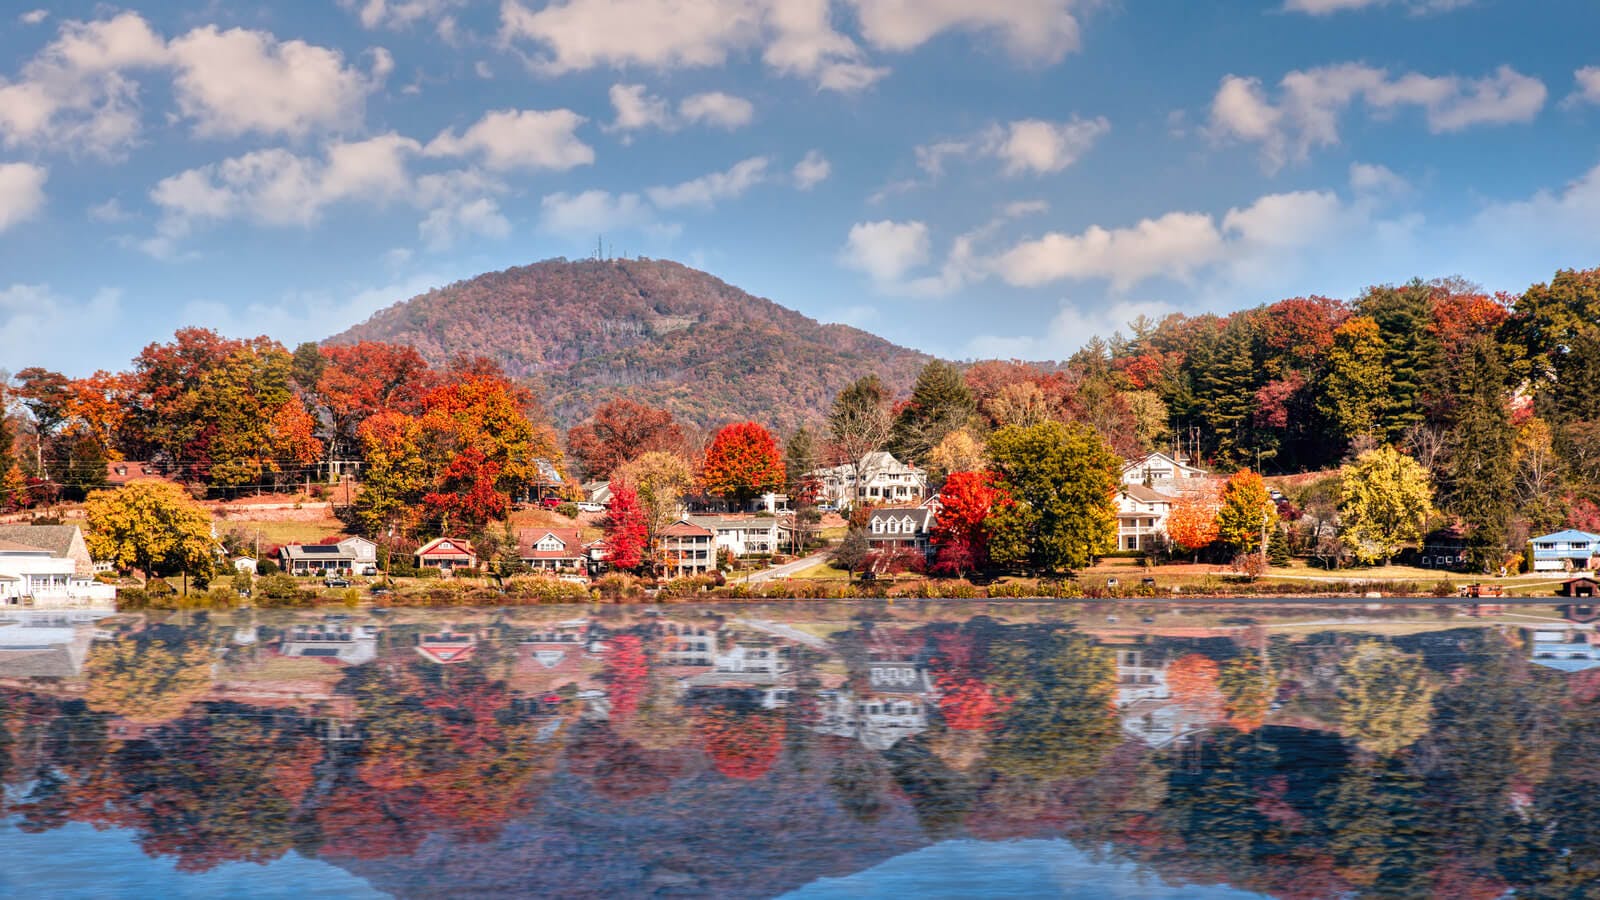 Lake Junaluska in Asheville, North Carolina, with fall-colored trees and a mountain backdrop